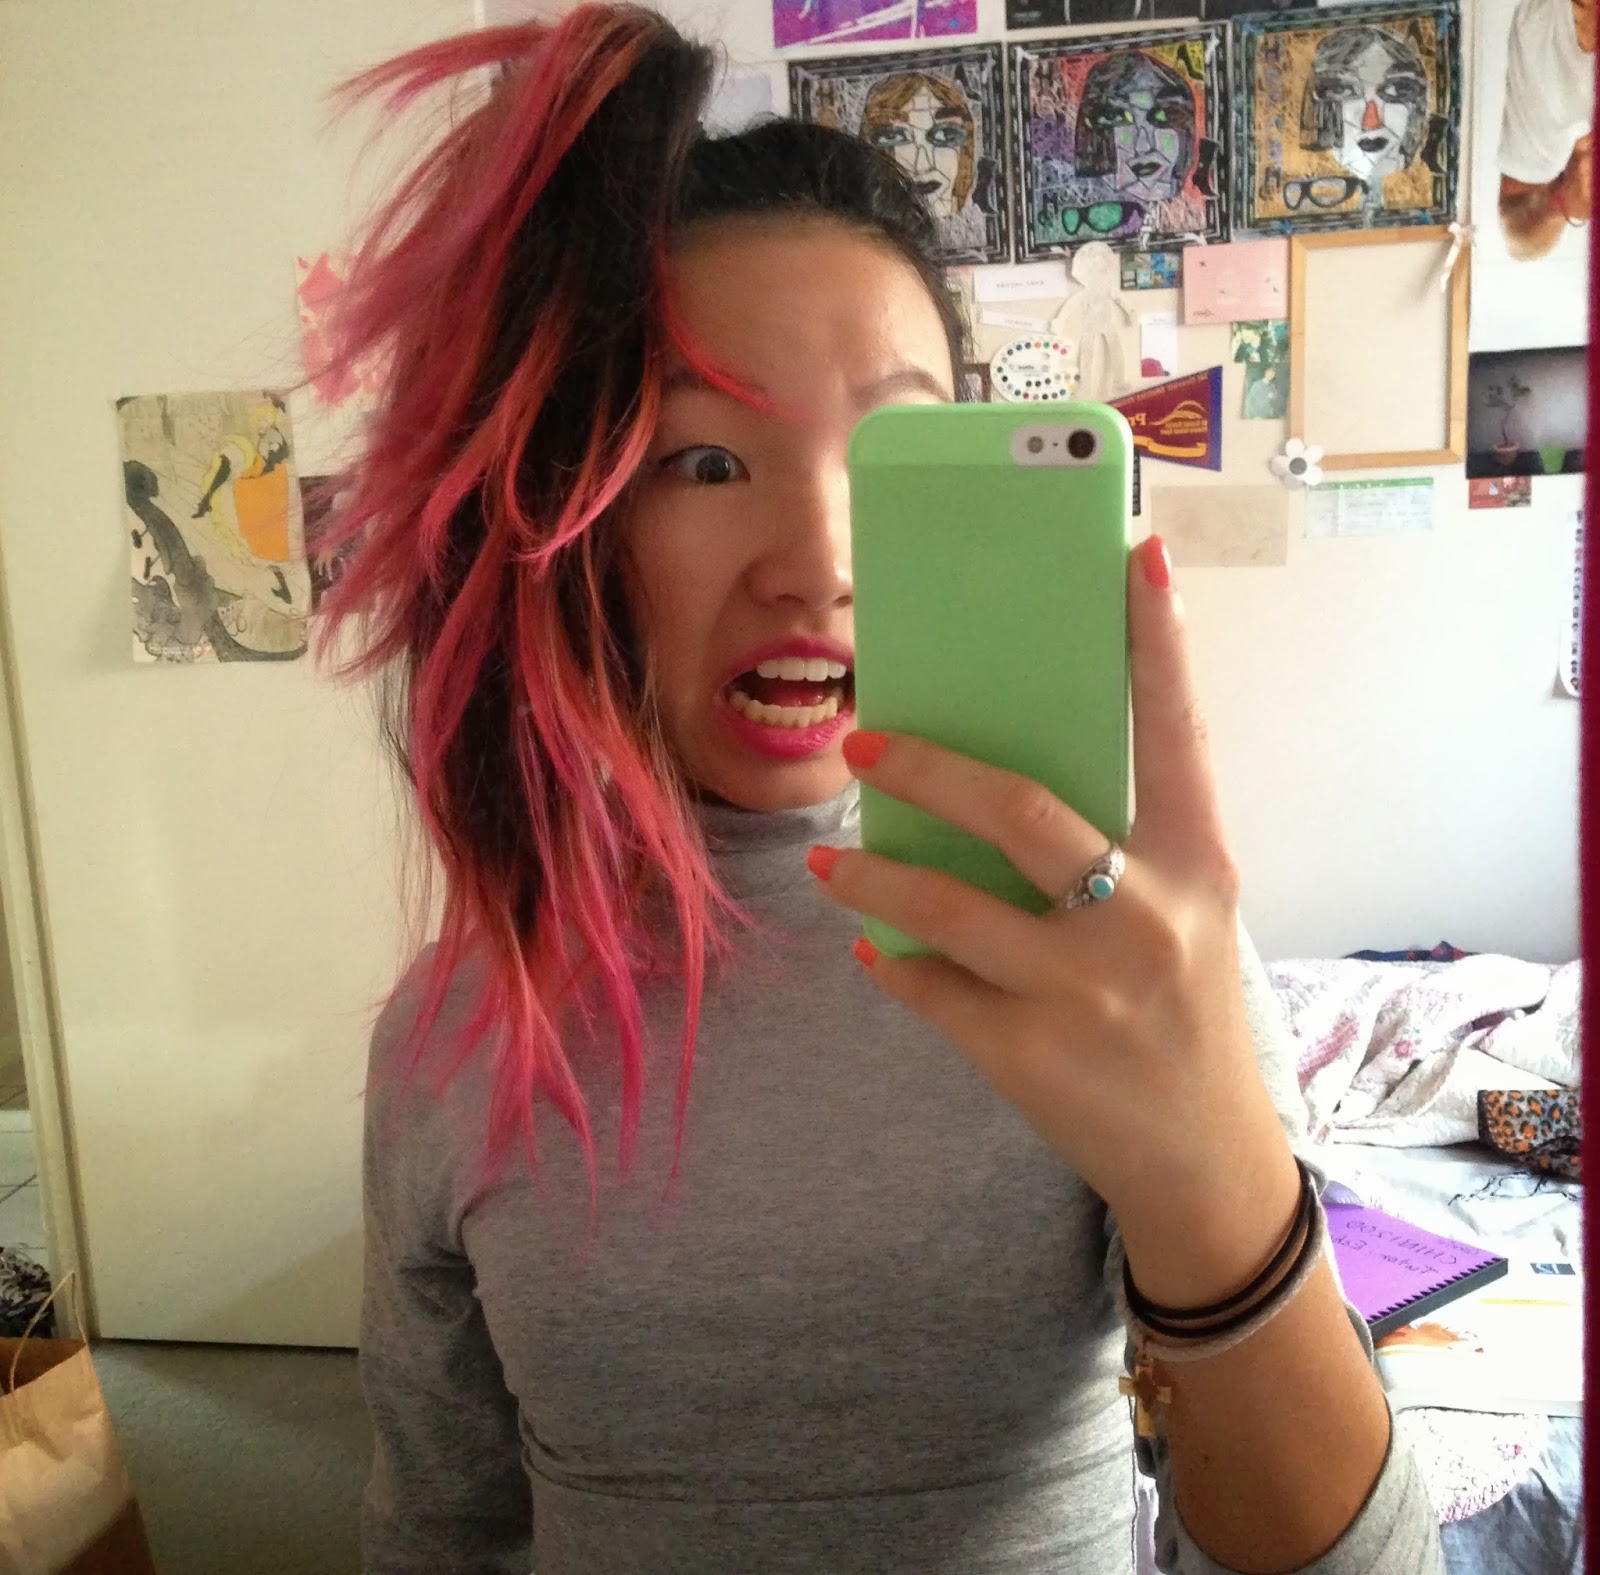 itsconnieyeah: Photographic Diary of My Hair Dye Adventures